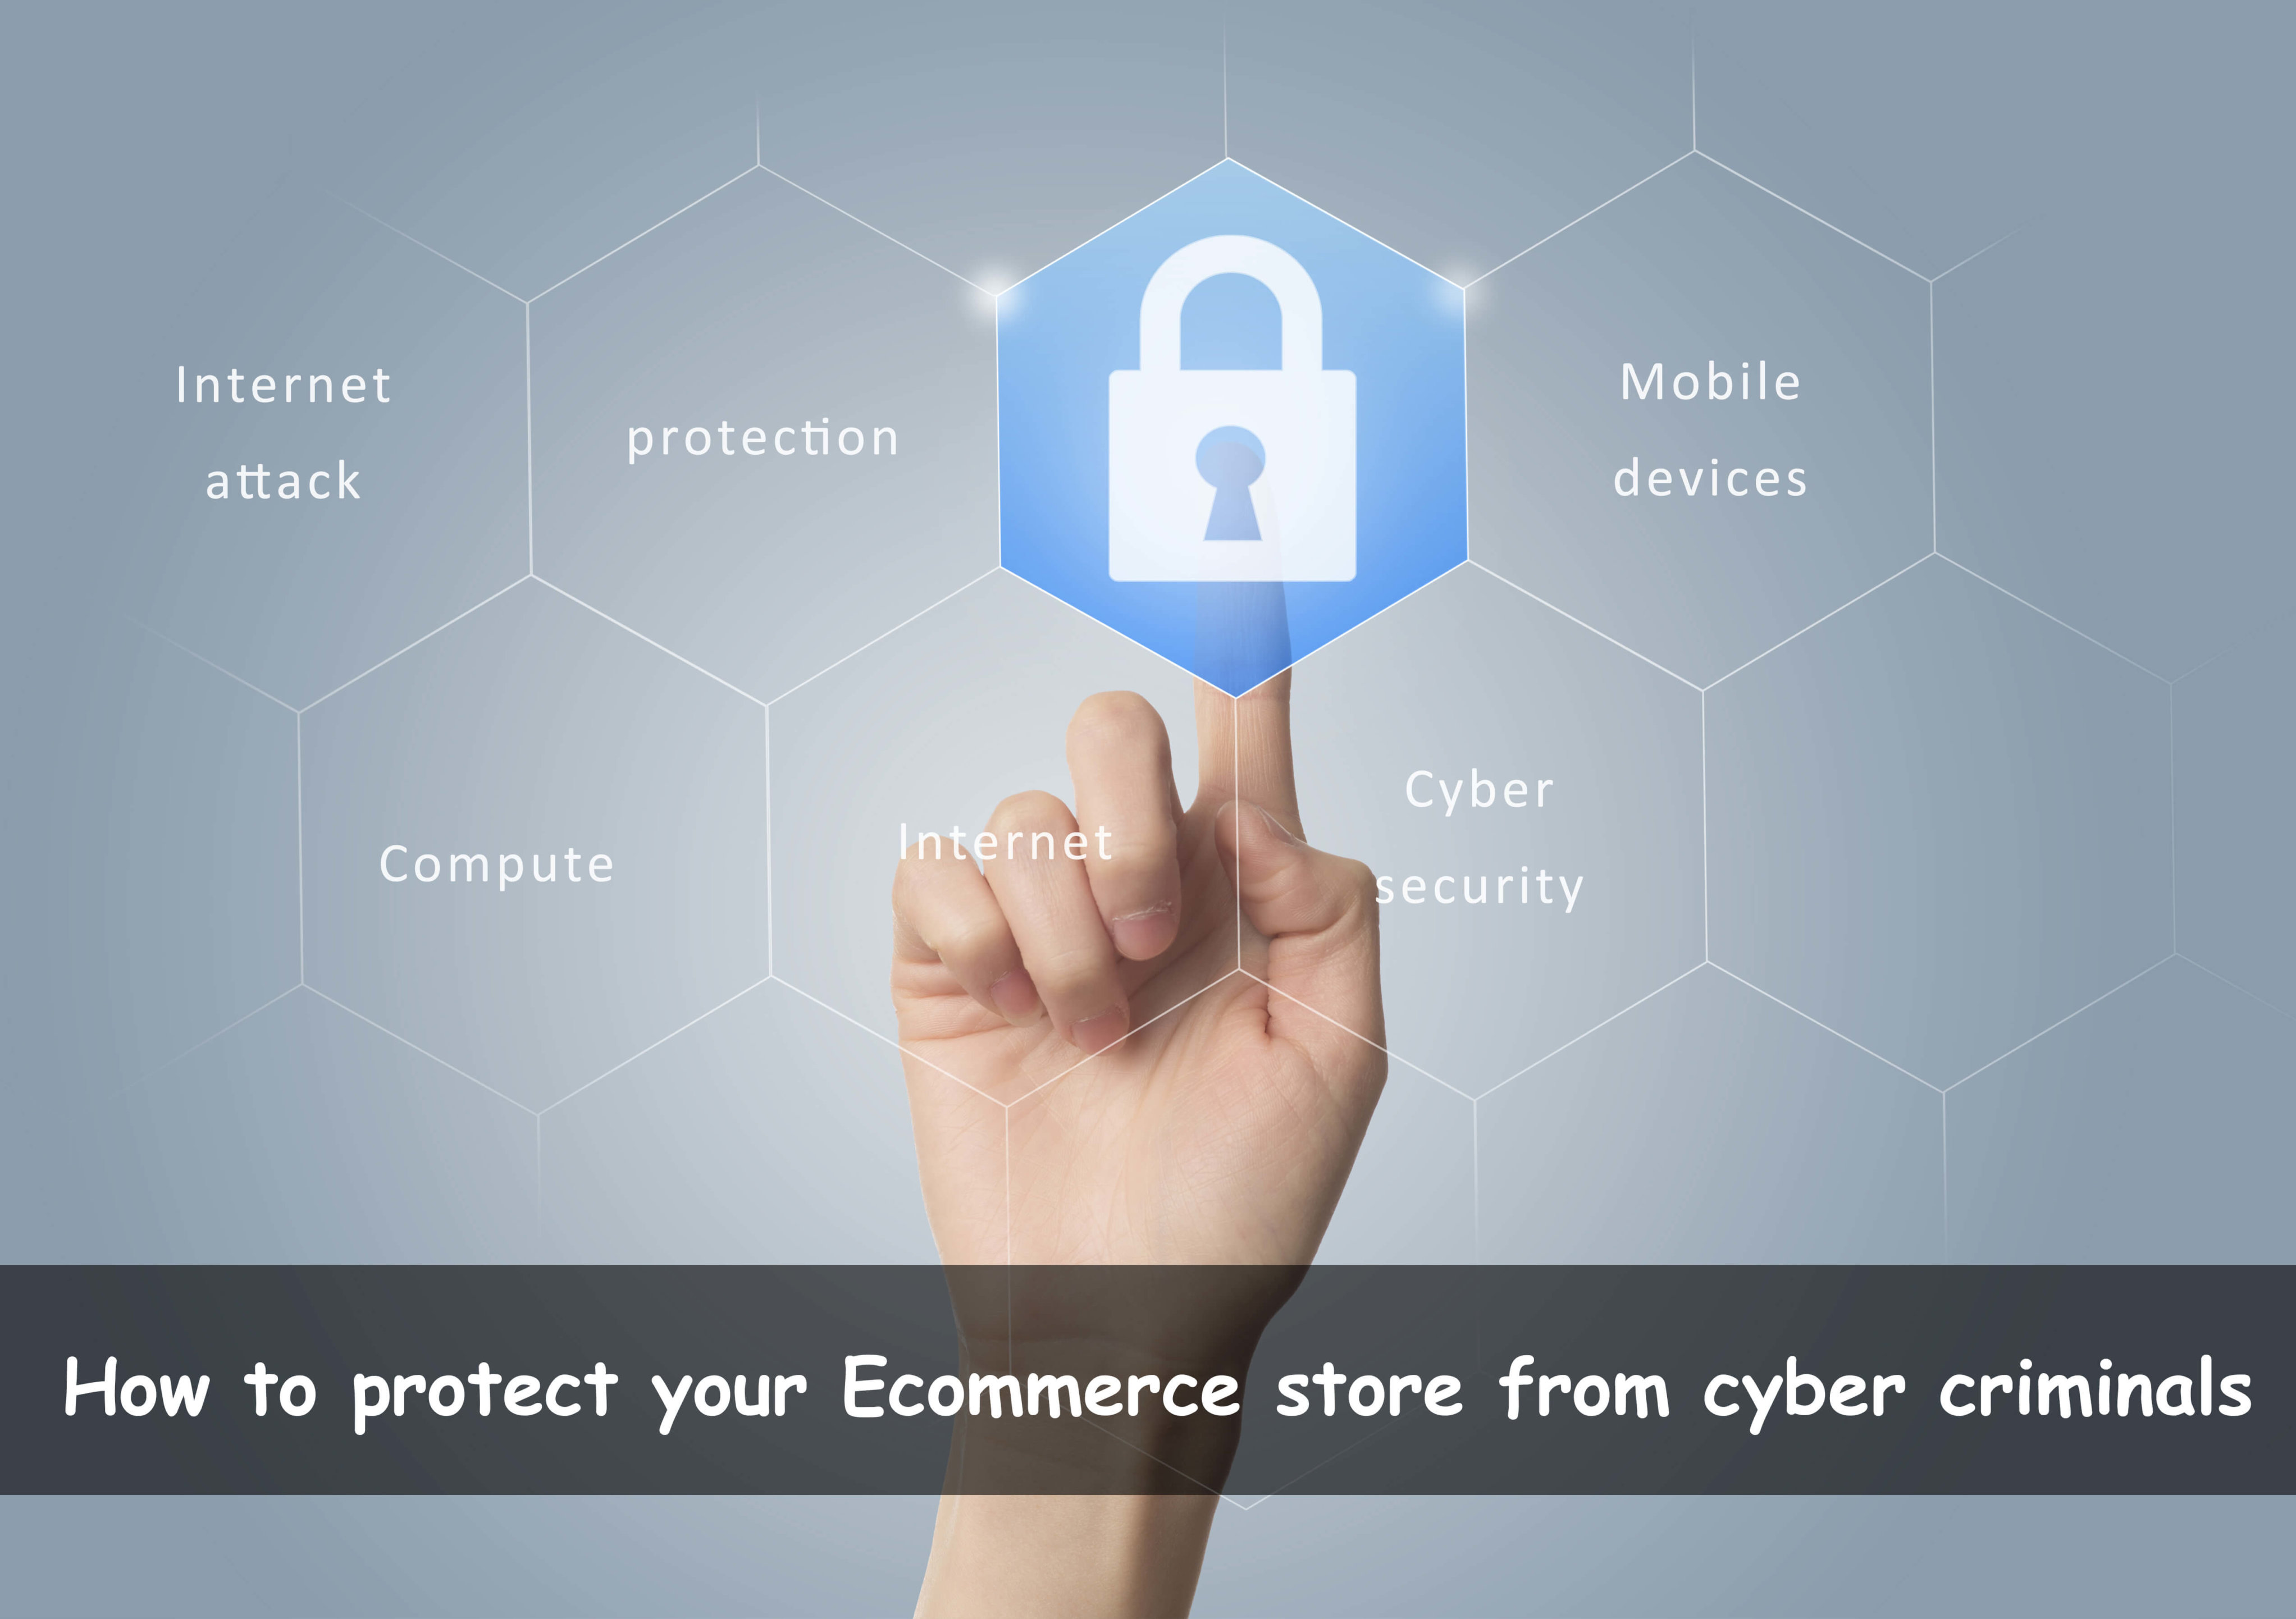 How to protect your Ecommerce store from cyber criminals